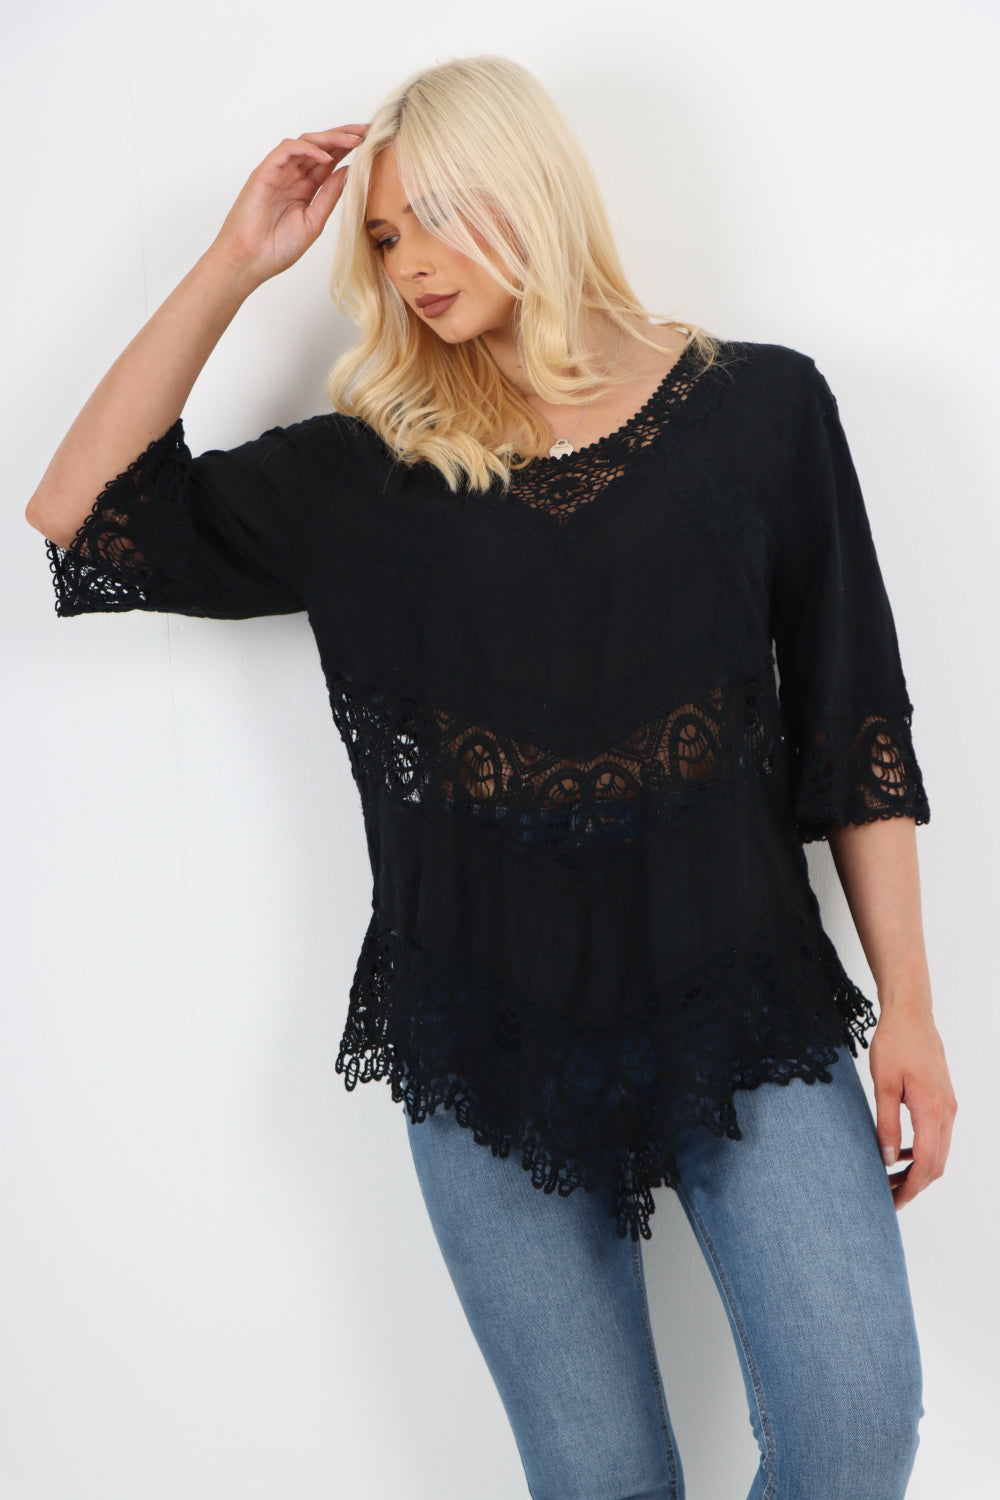 Italian Crochet Lace Embroidered Asymmetrical Cotton Top